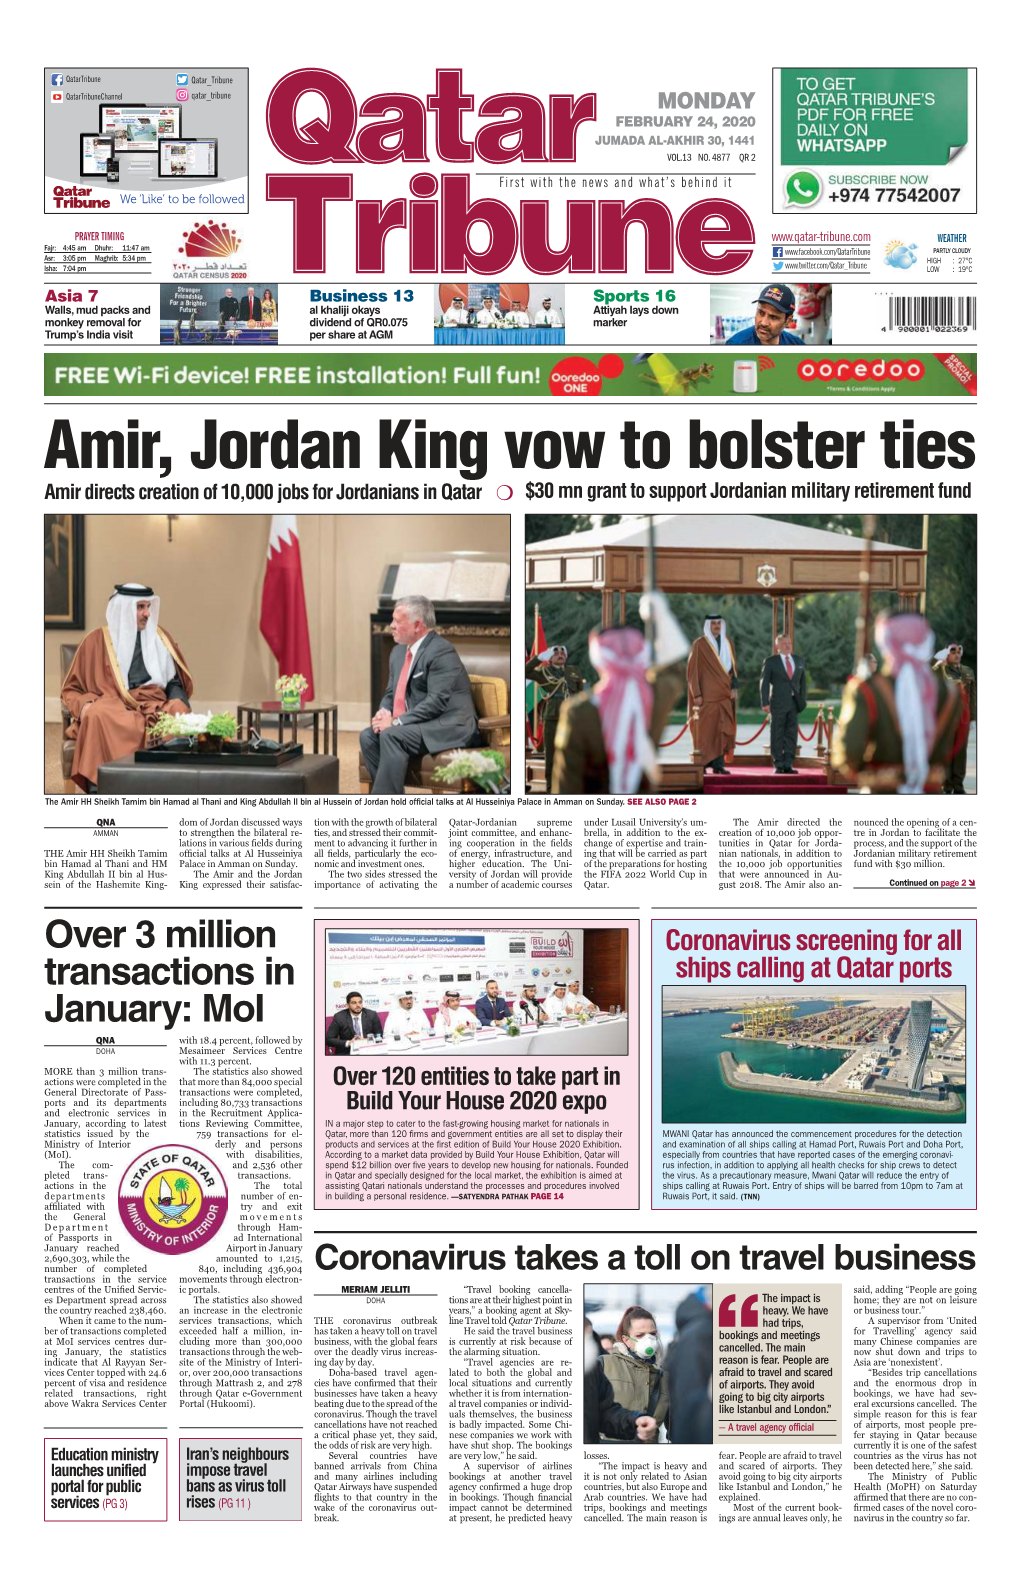 Amir, Jordan King Vow to Bolster Ties Amir Directs Creation of 10,000 Jobs for Jordanians in Qatar $30 Mn Grant to Support Jordanian Military Retirement Fund